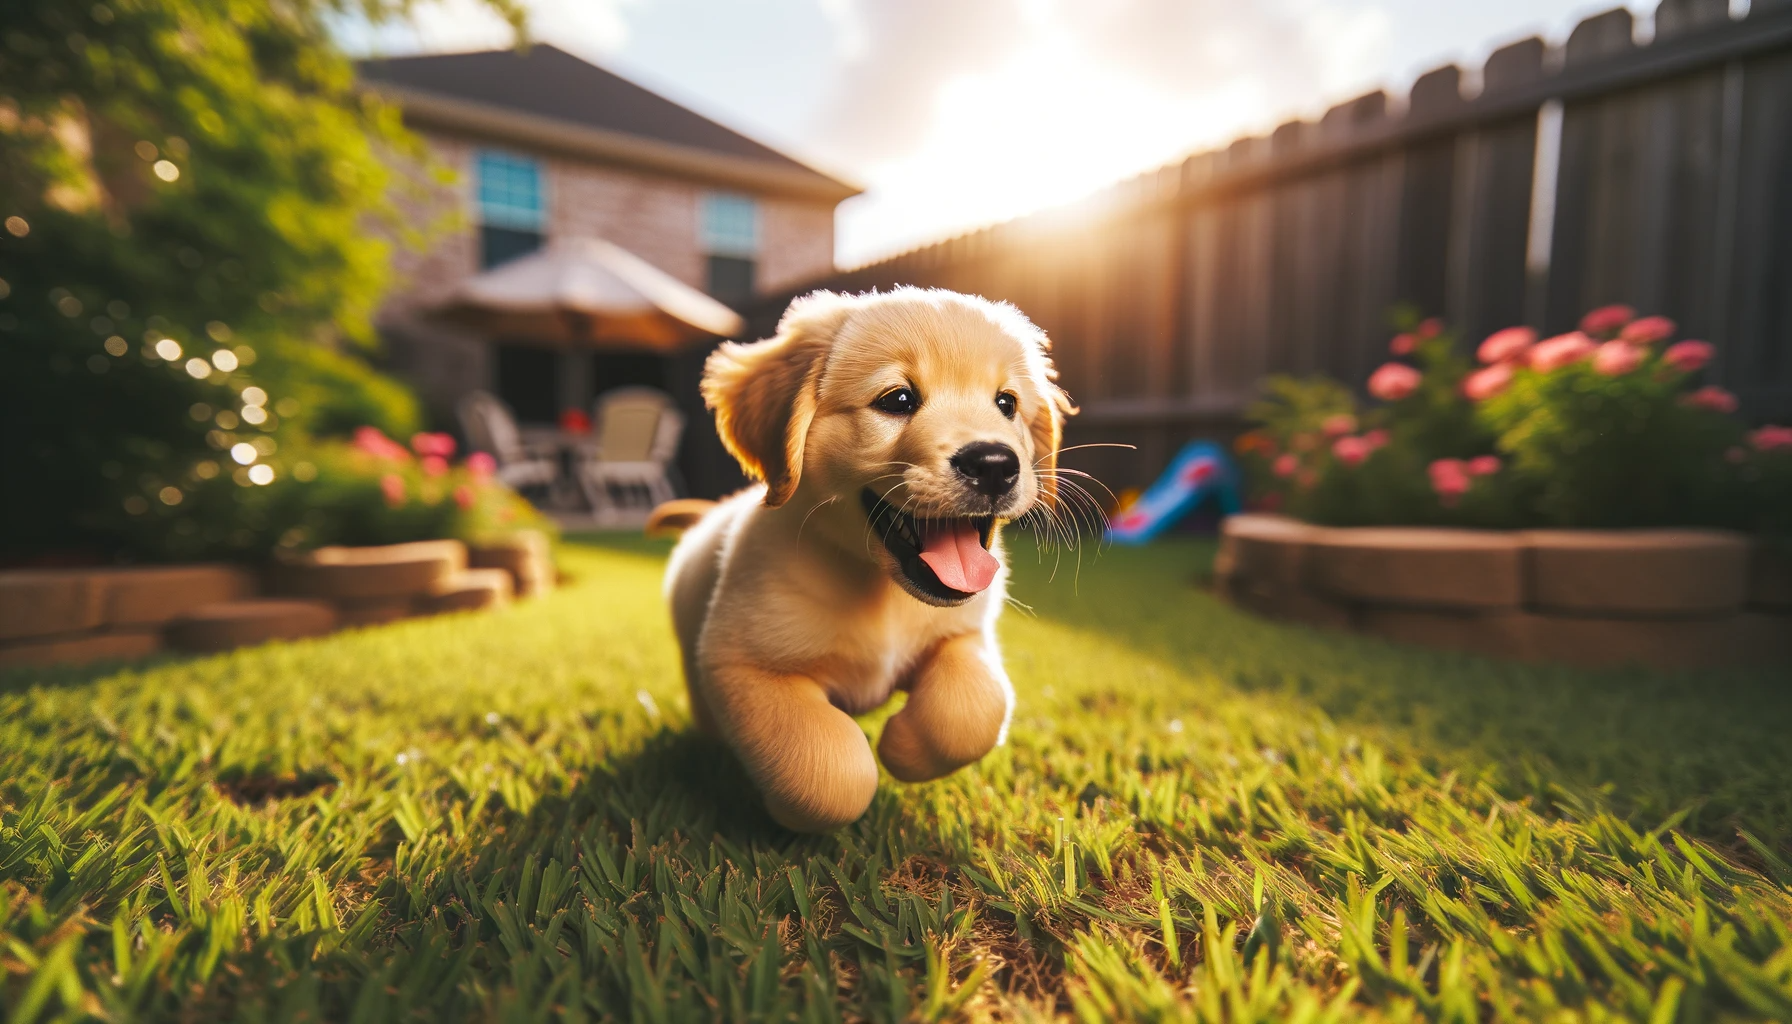 A Goldador puppy frolicking in the yard, unaware that its cuteness is practically illegal